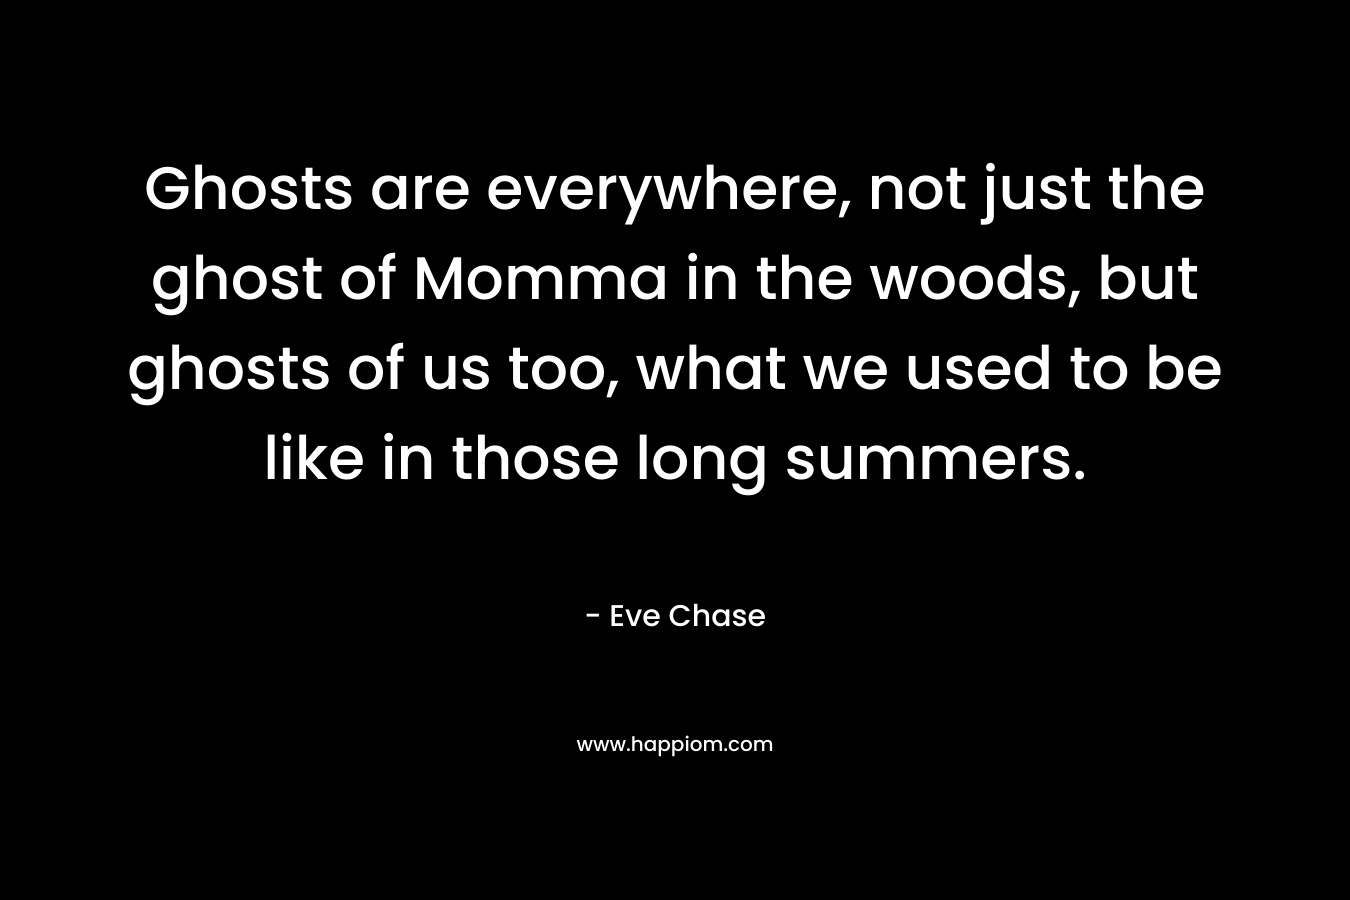 Ghosts are everywhere, not just the ghost of Momma in the woods, but ghosts of us too, what we used to be like in those long summers. – Eve Chase